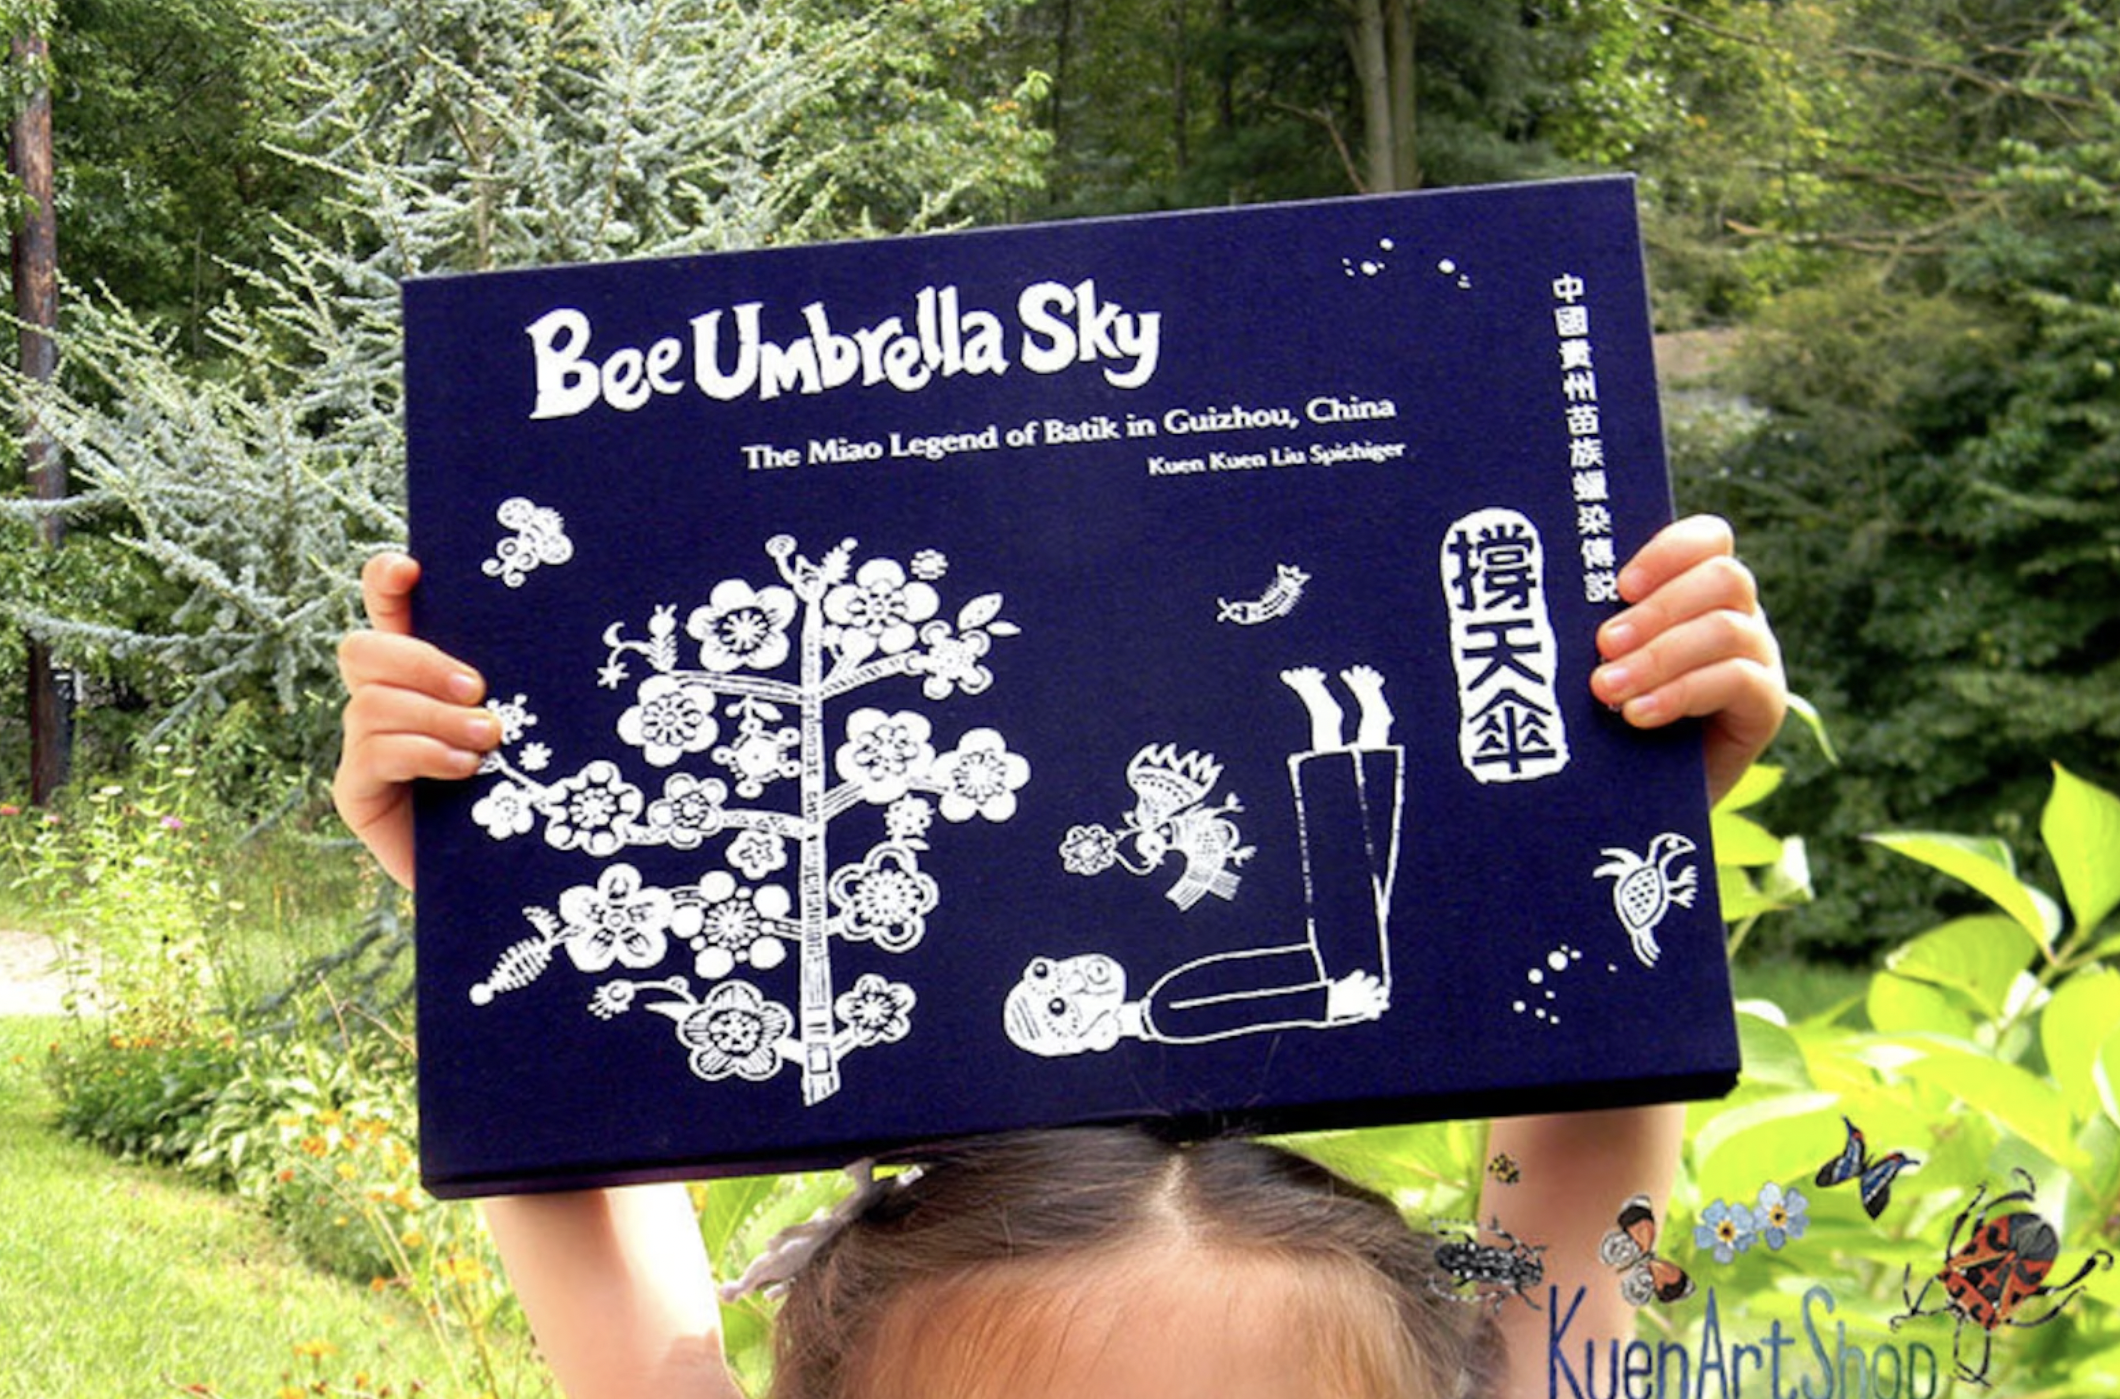 A girl holding up a copy of the book Bee Umbrella Sky